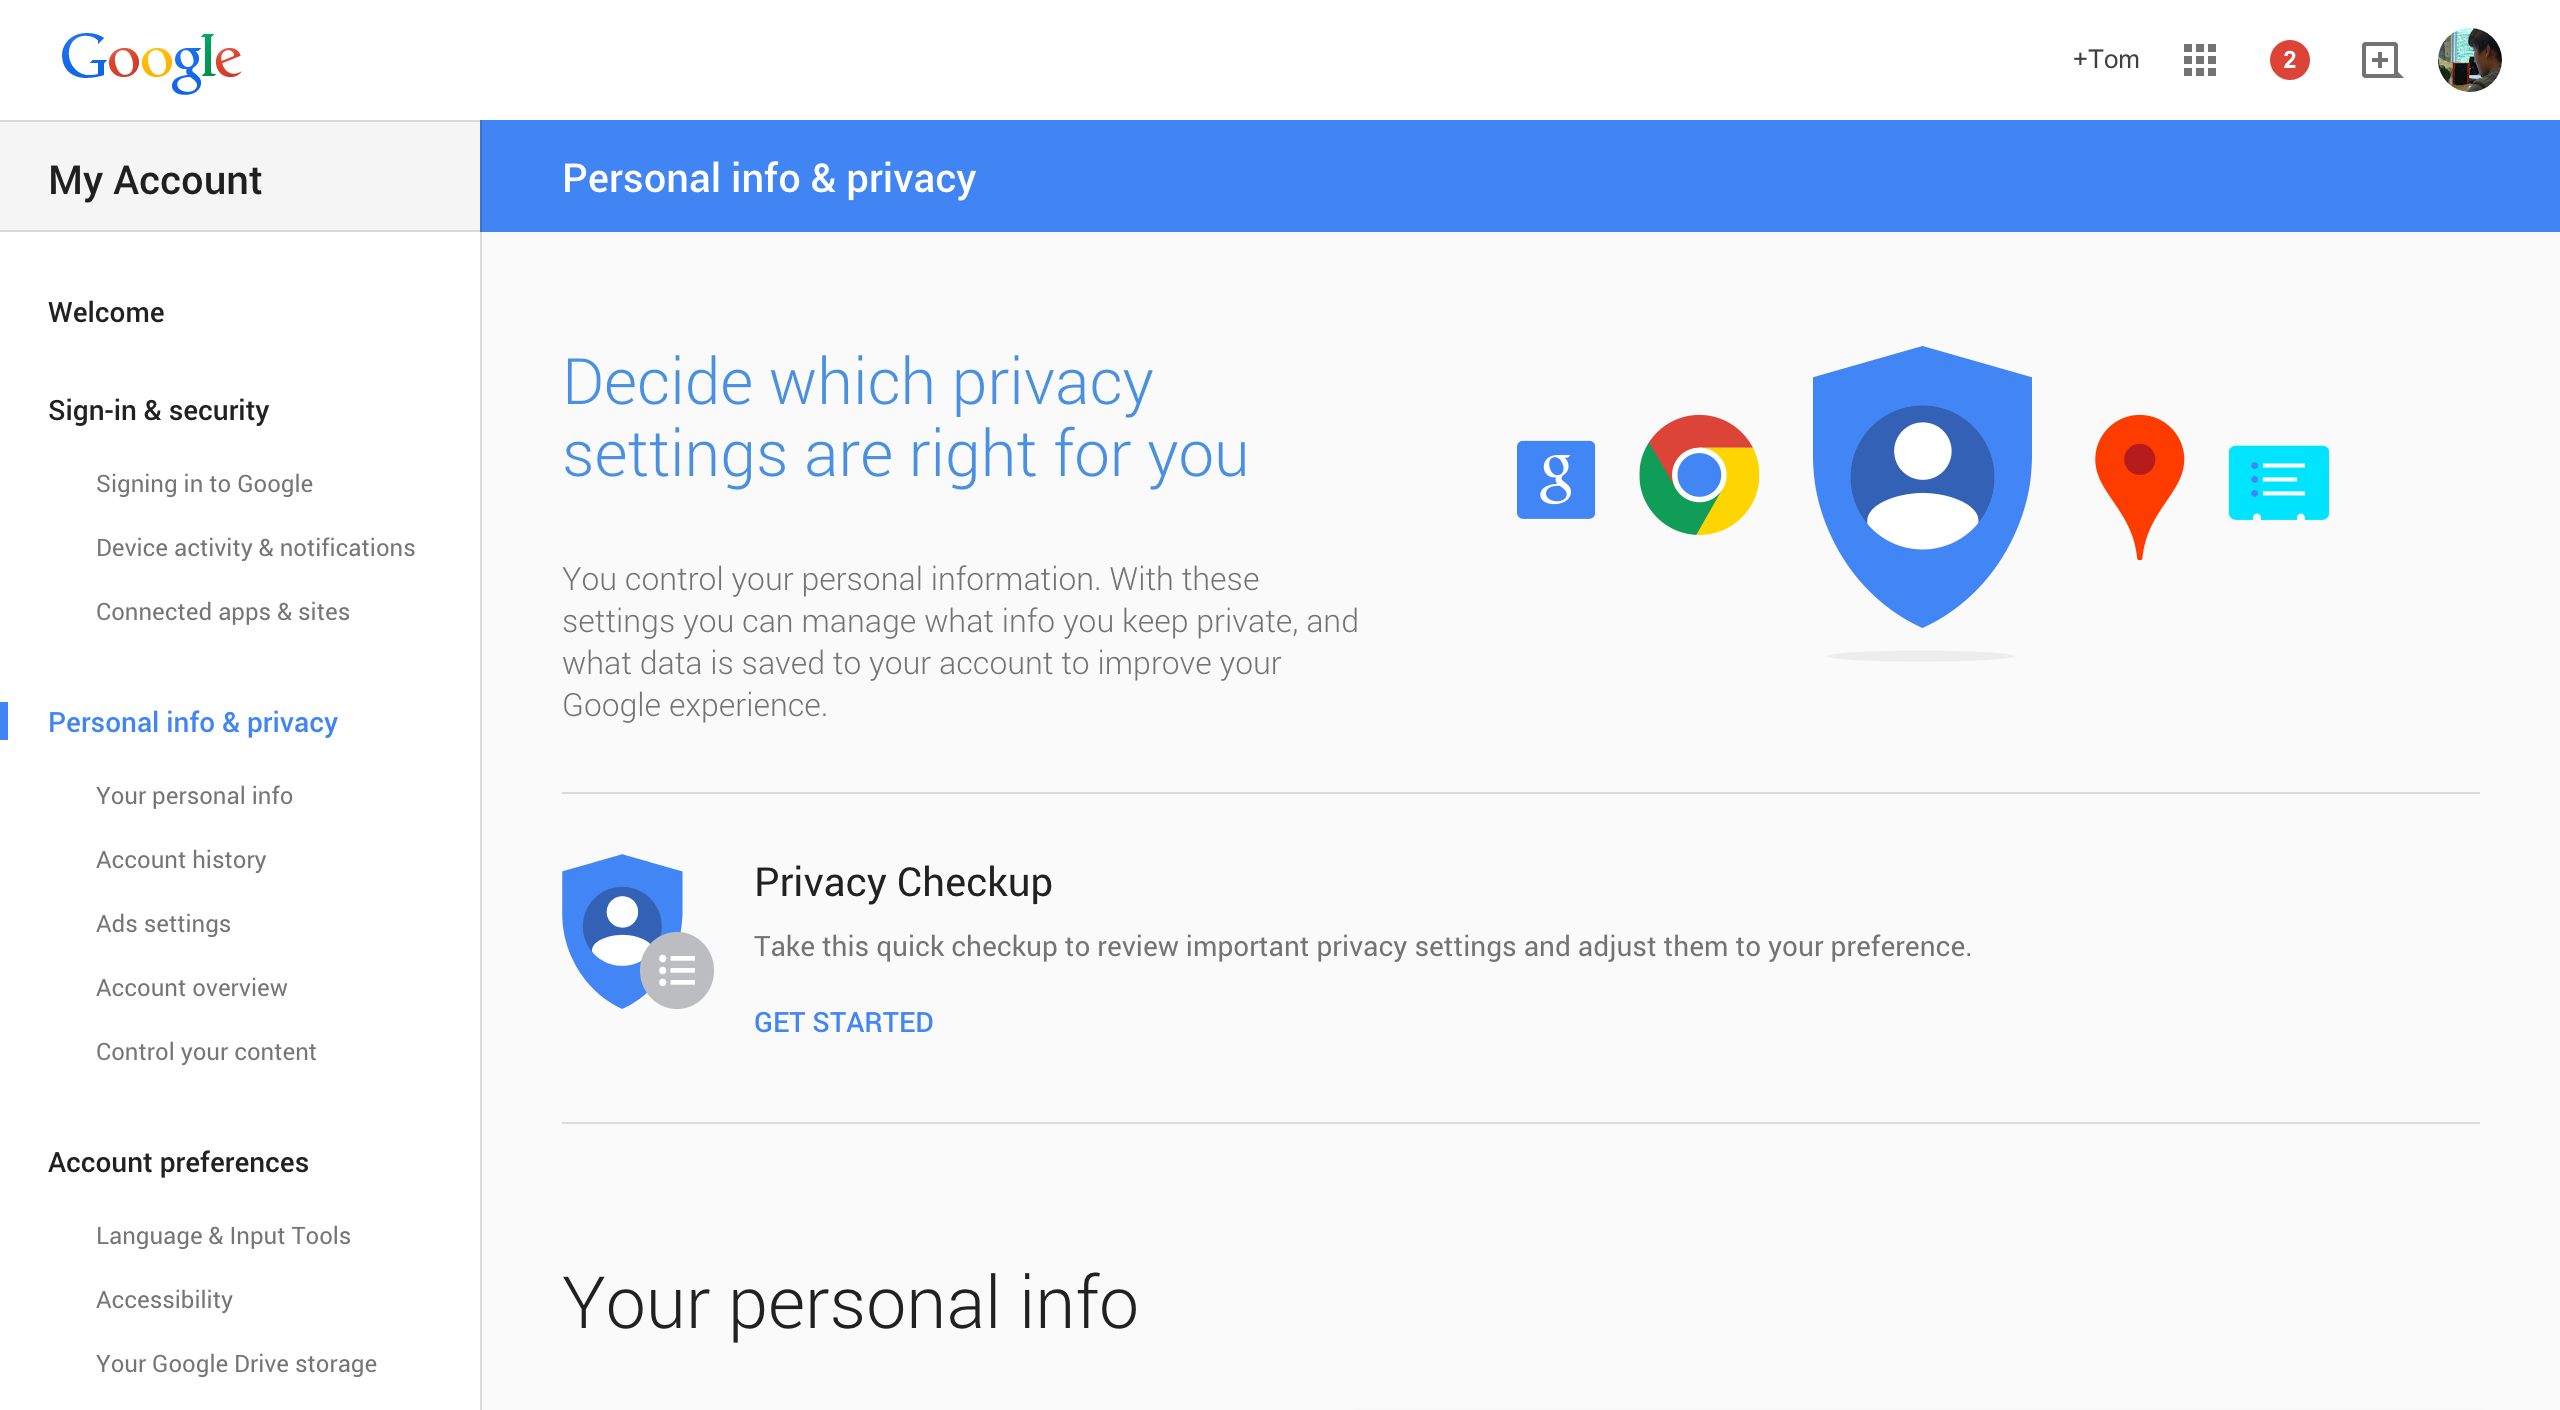 Google's account settings page has received a refreshed design